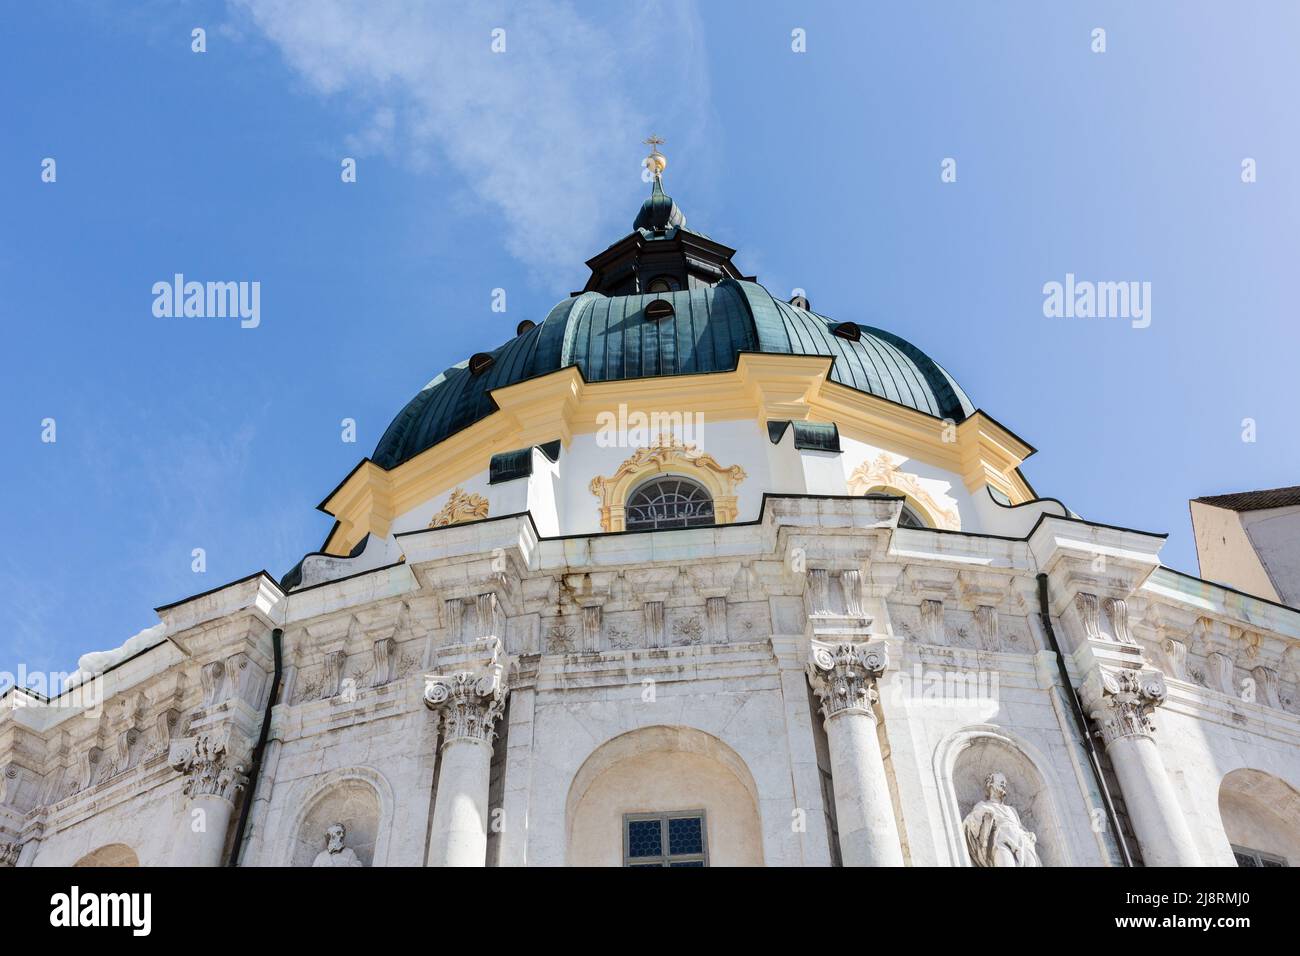 Ettal, Germany - Feb 26, 2021: View up towards the main dome of the Ettal abbey basilica. Stock Photo